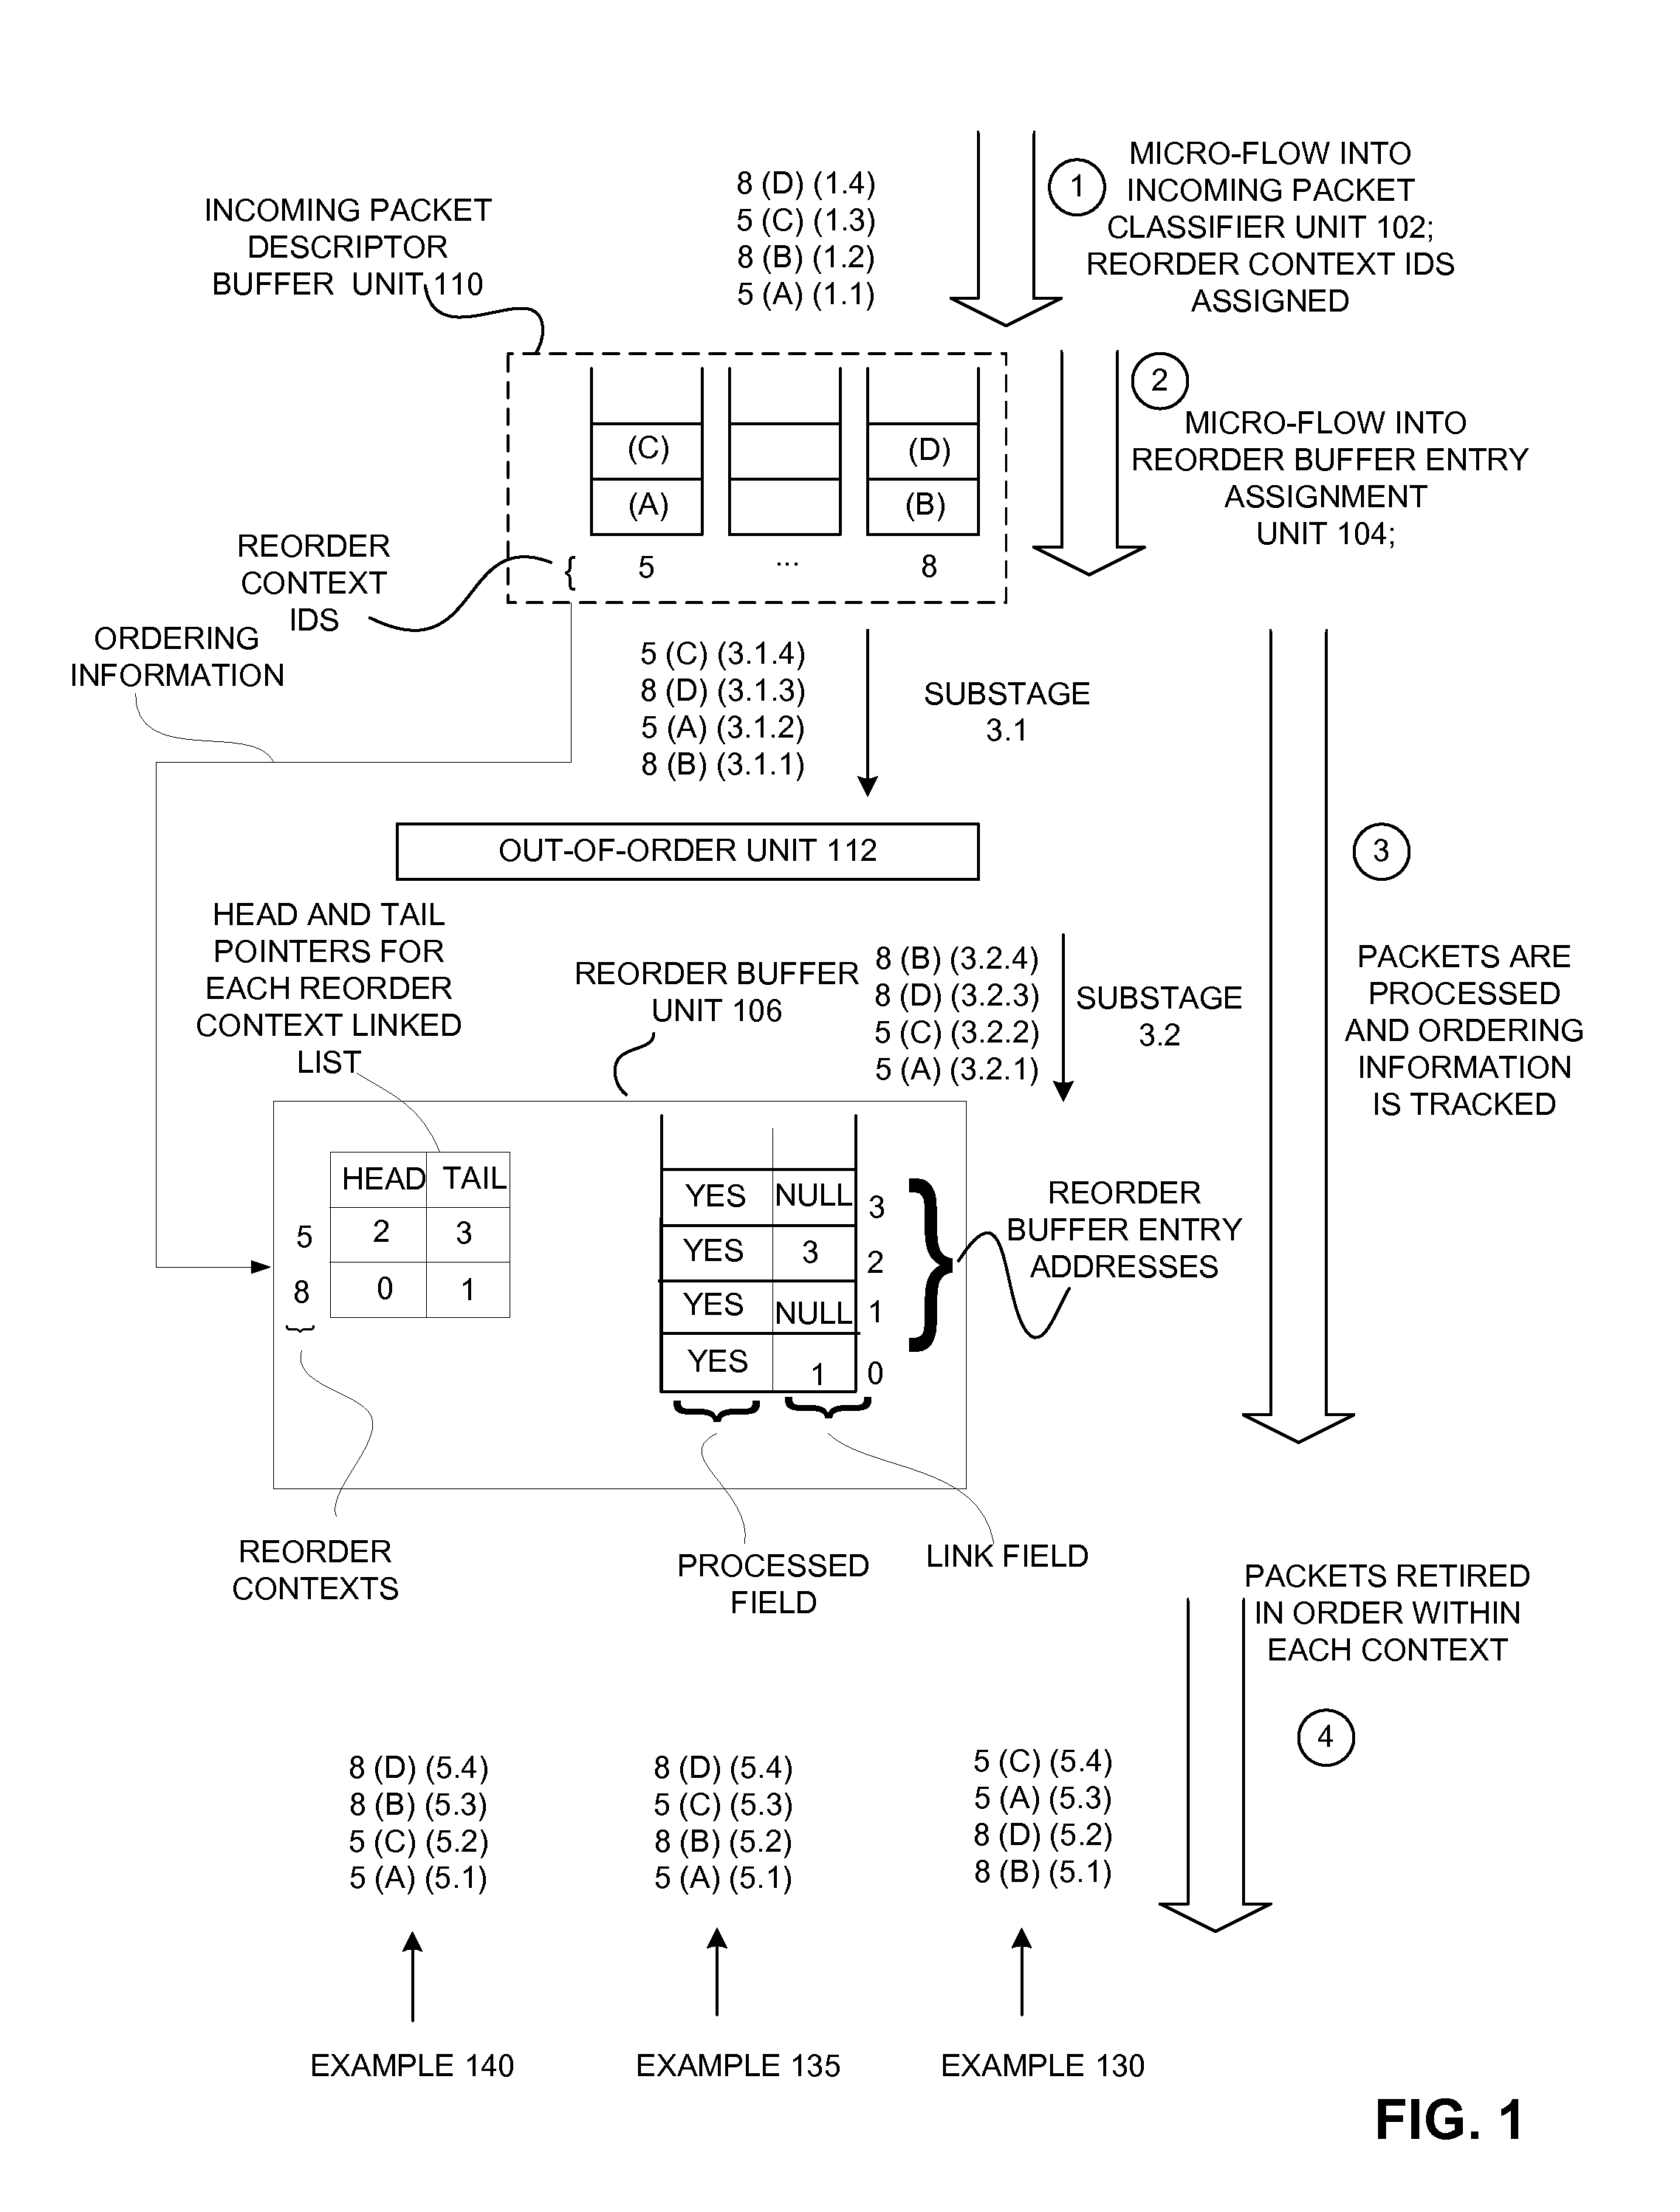 Method and Apparatus for Out-of-Order Processing of Packets using Linked Lists